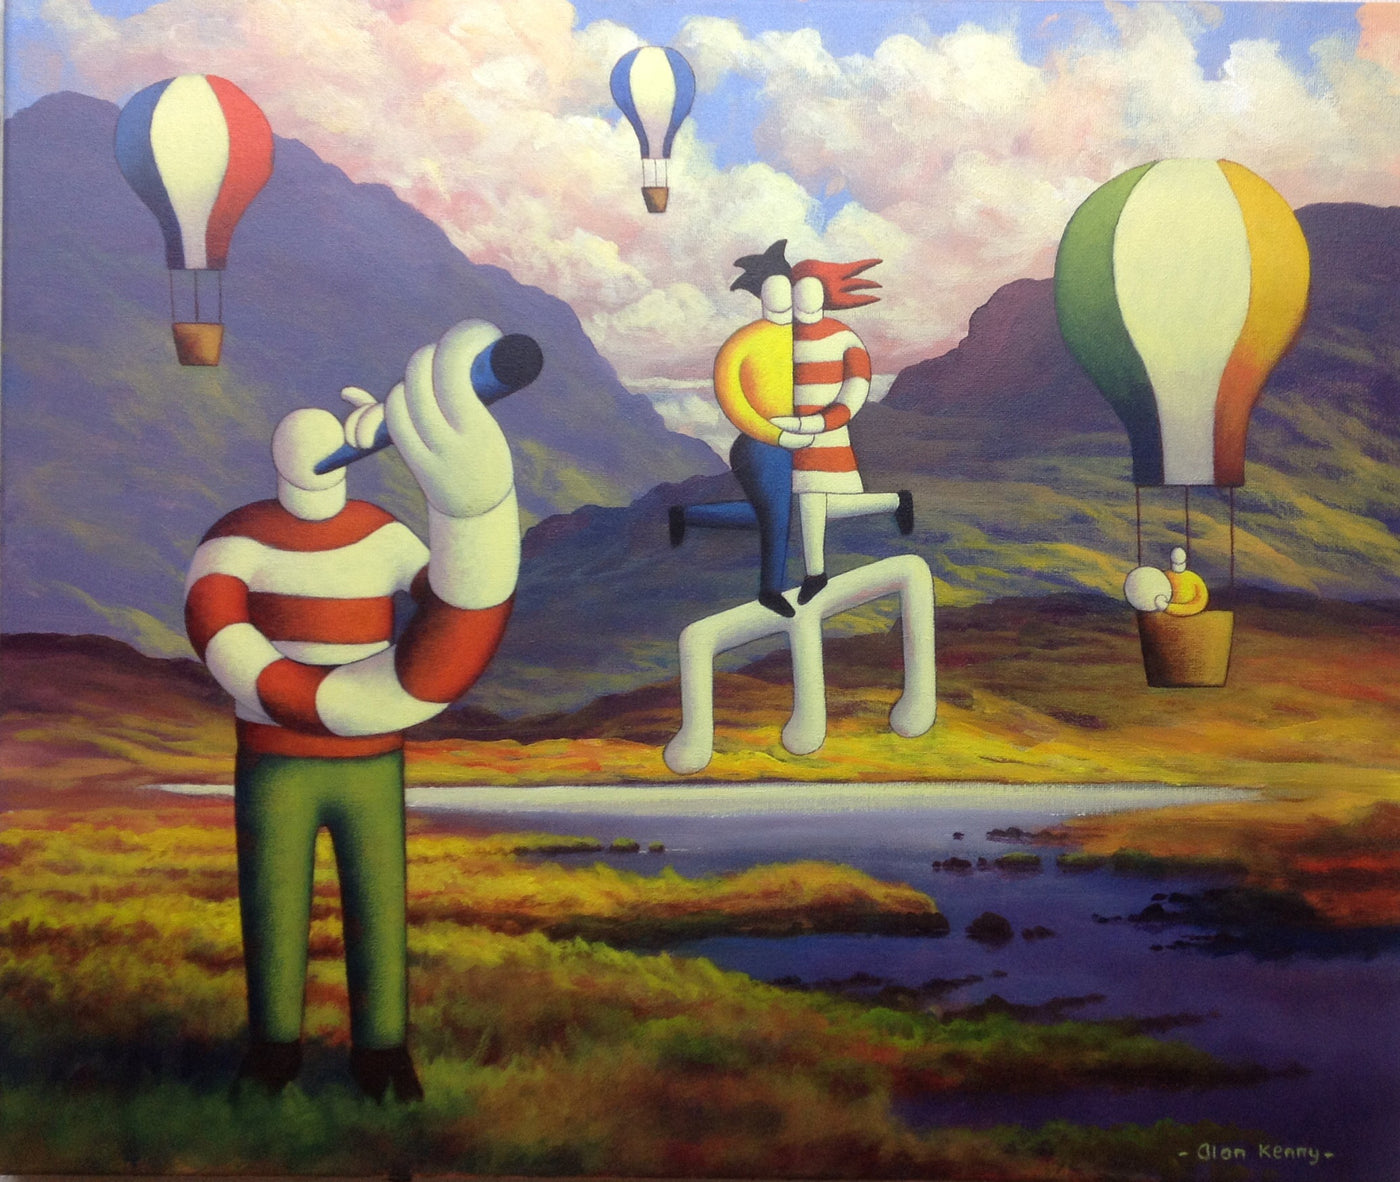 Connemara Landscape with lovers, musicians, and balloons - Green Gallery